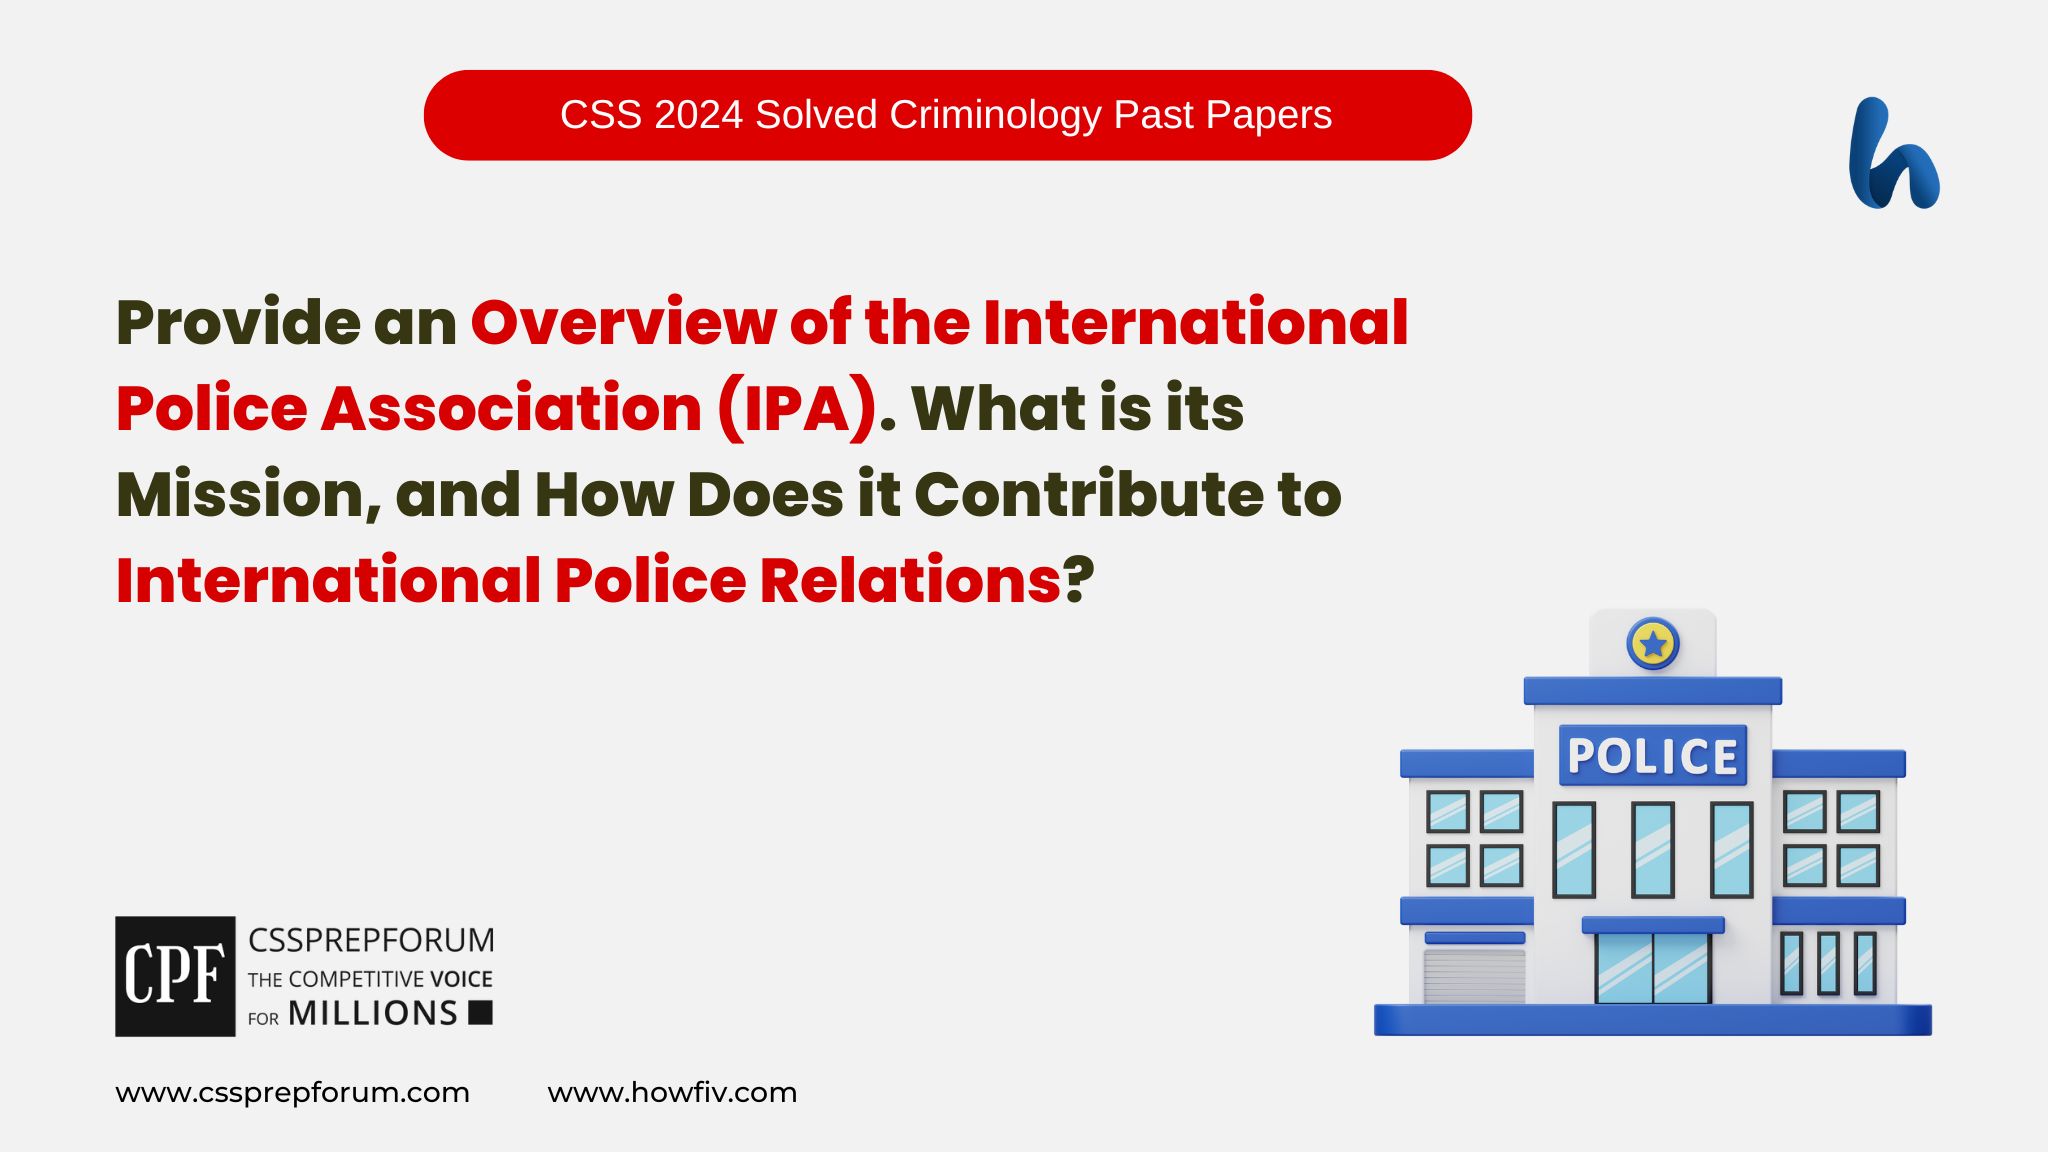 Provide an Overview of the International Police Association (IPA). What is its Mission, and How Does it Contribute to International Police Relations